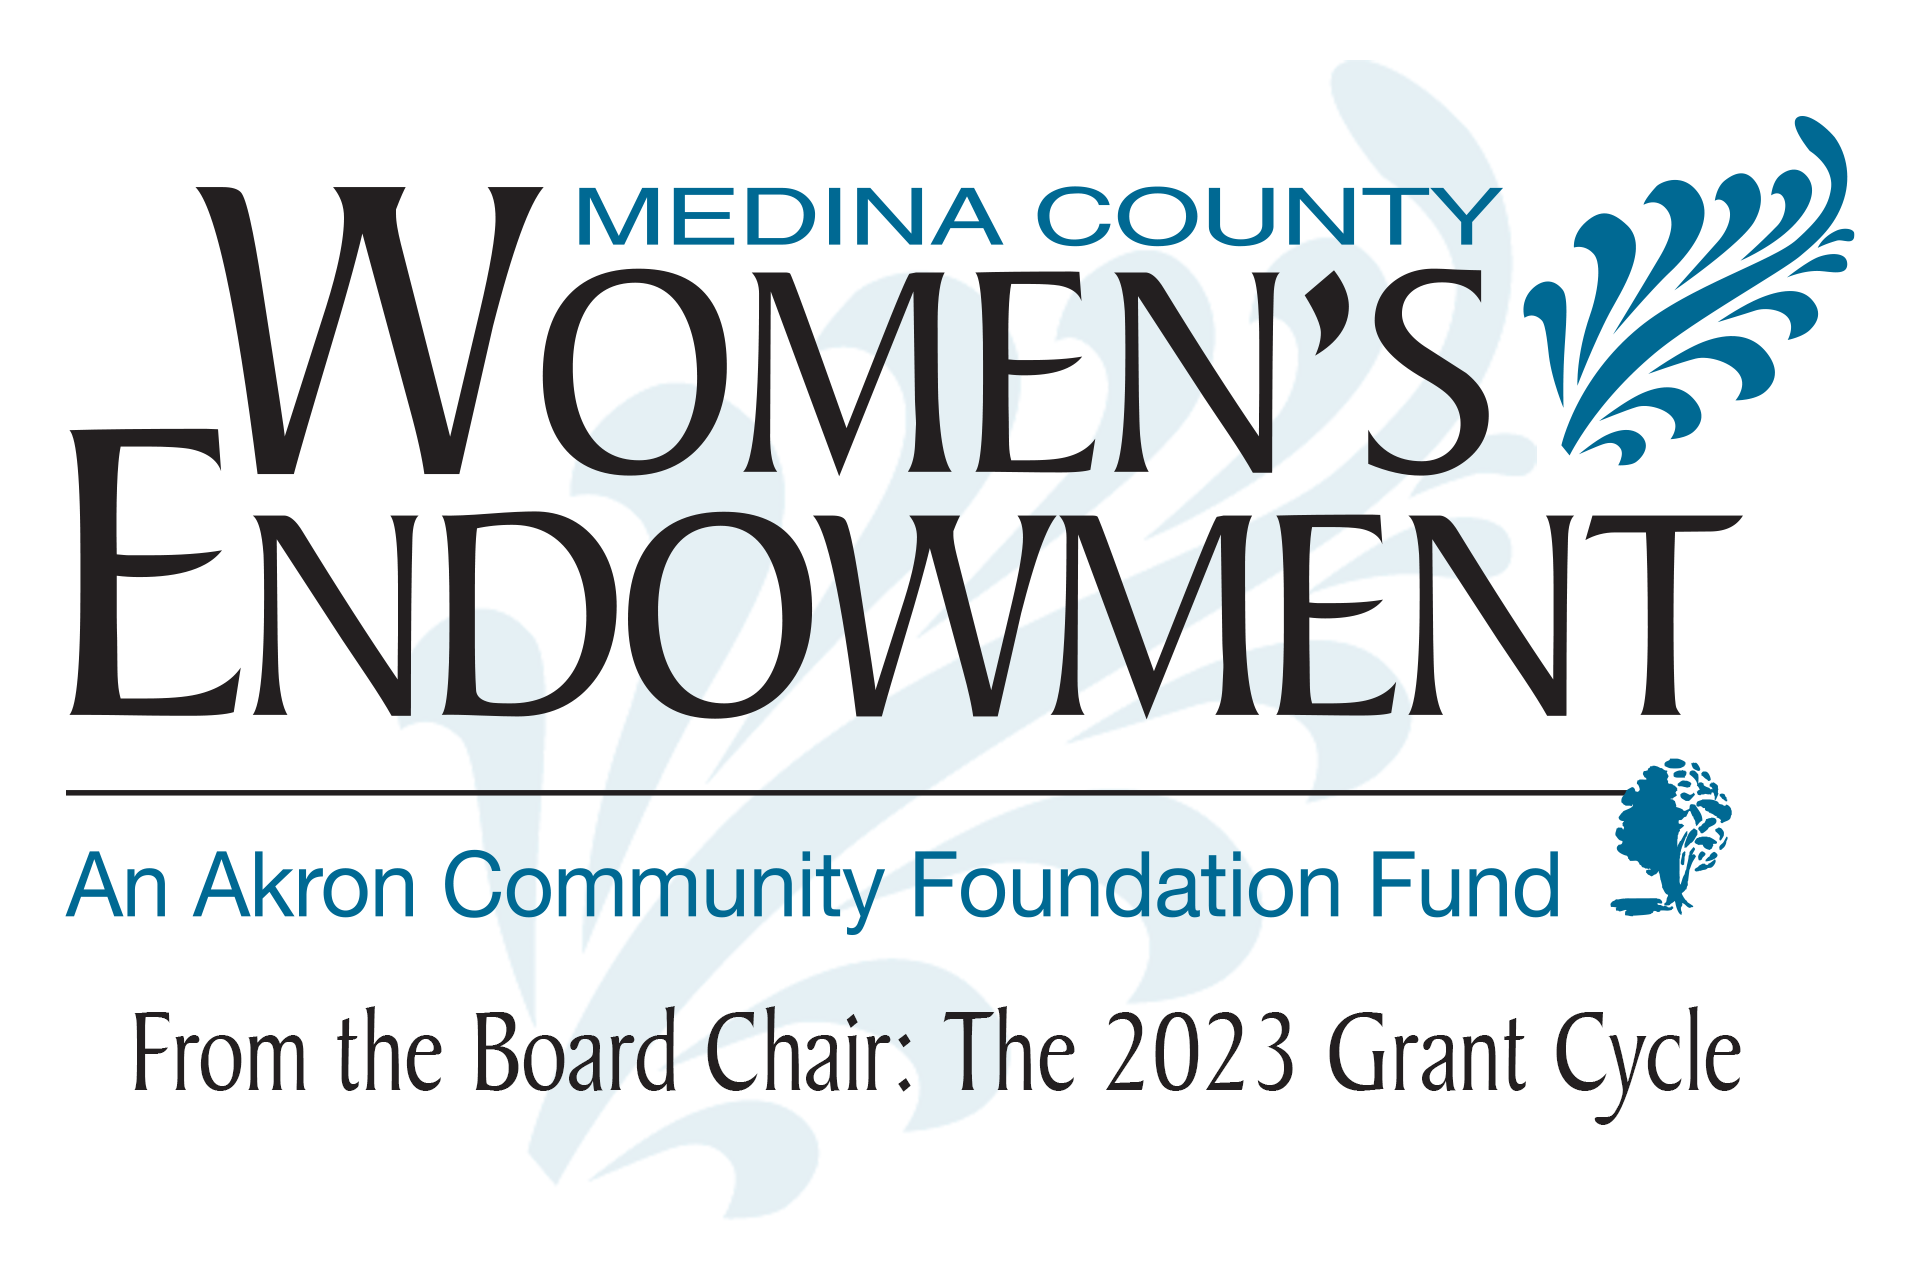 From the Board Chair: The 2023 Grant Cycle